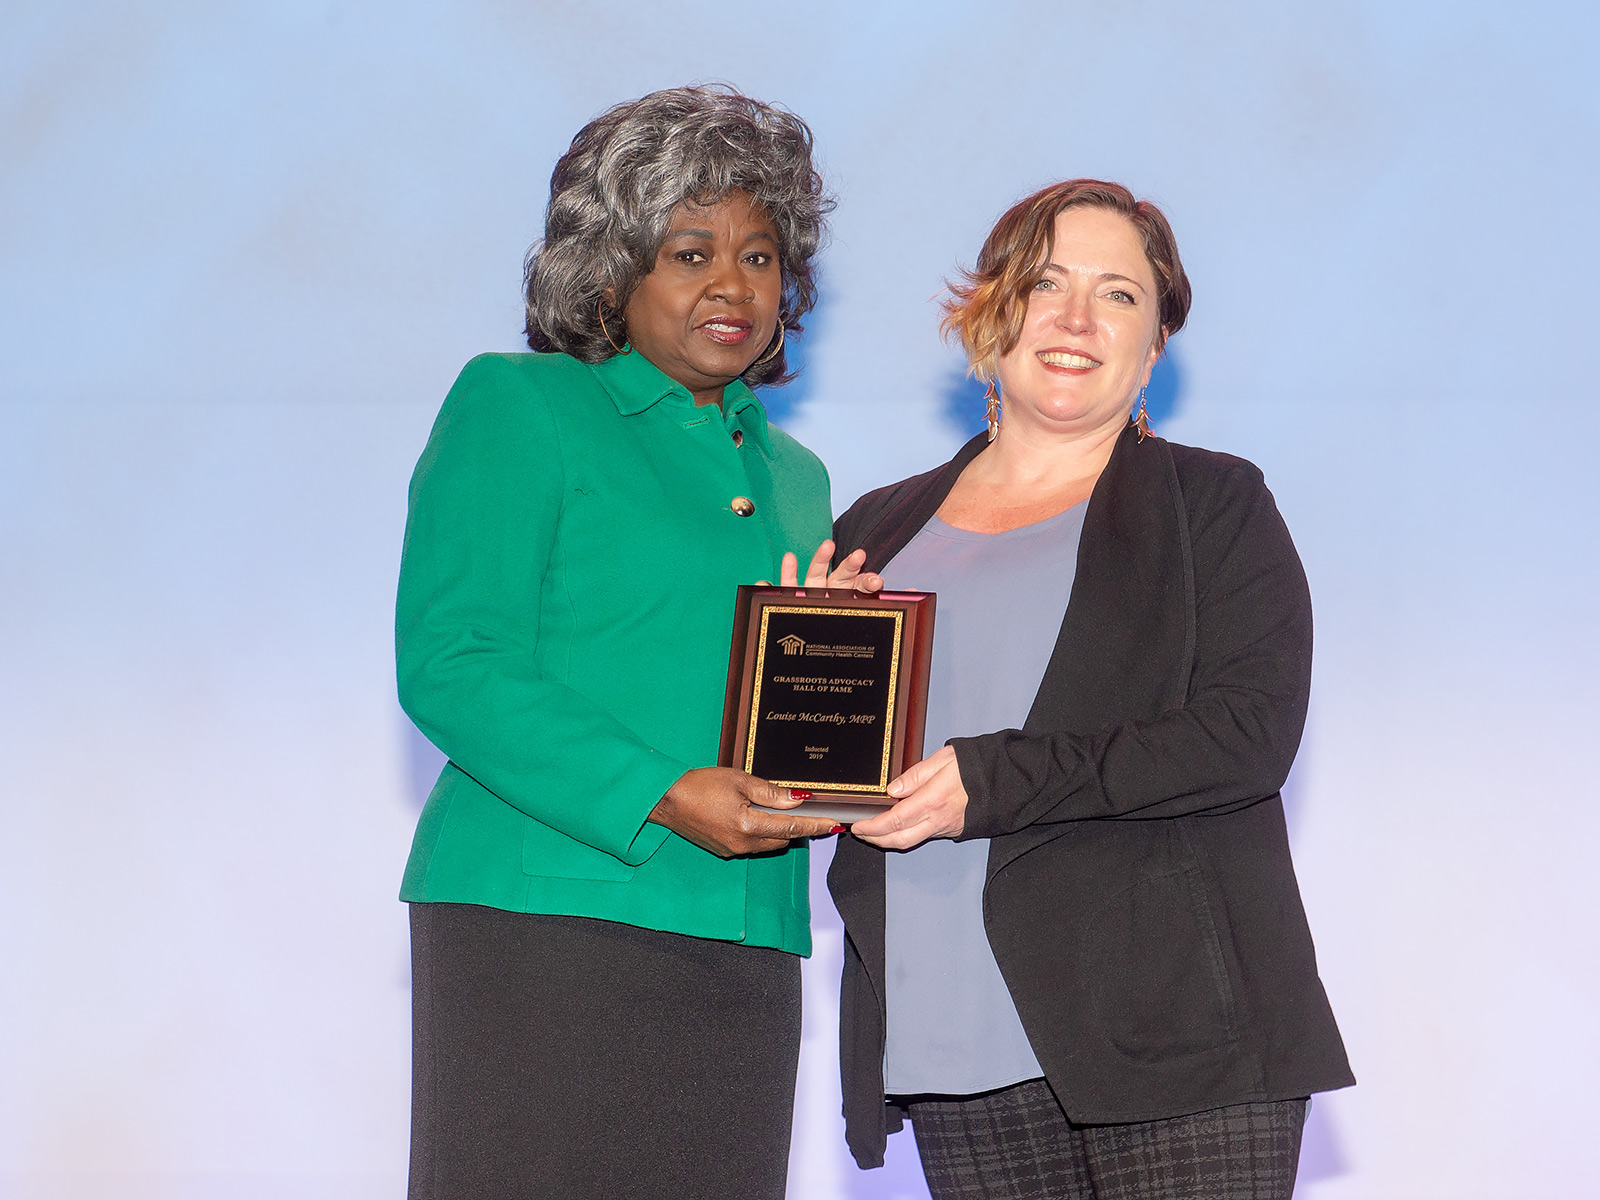  Louise McCarthy, President and CEO of the     Community Clinic Association of Los Angeles County, was inducted into NACHC’s Grassroots Hall of Fame 